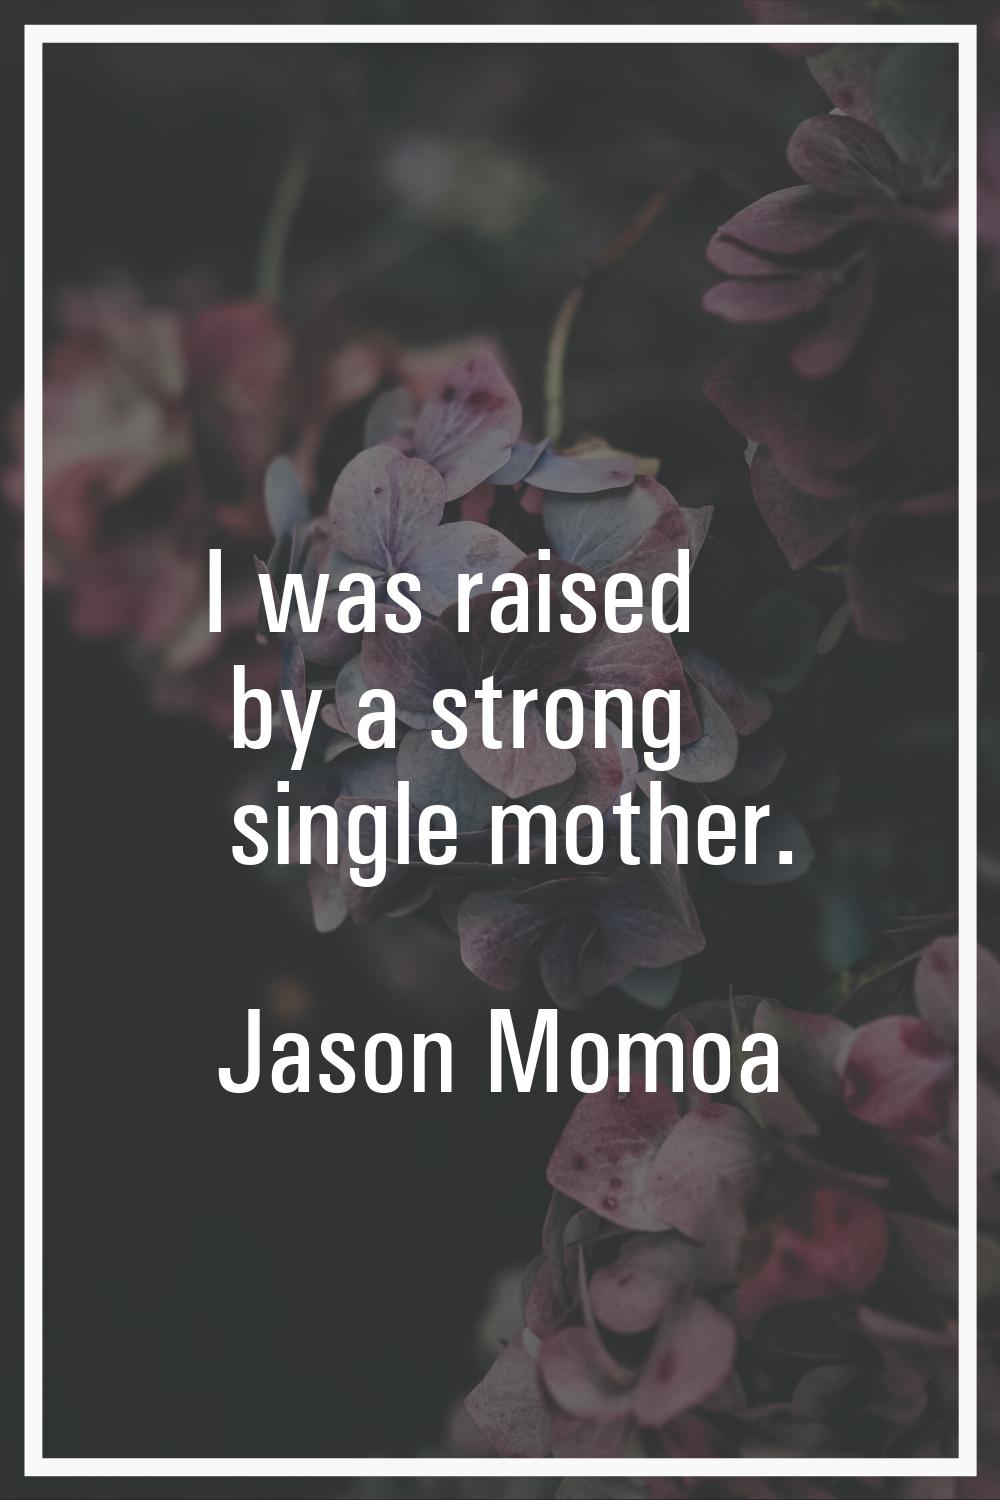 I was raised by a strong single mother.